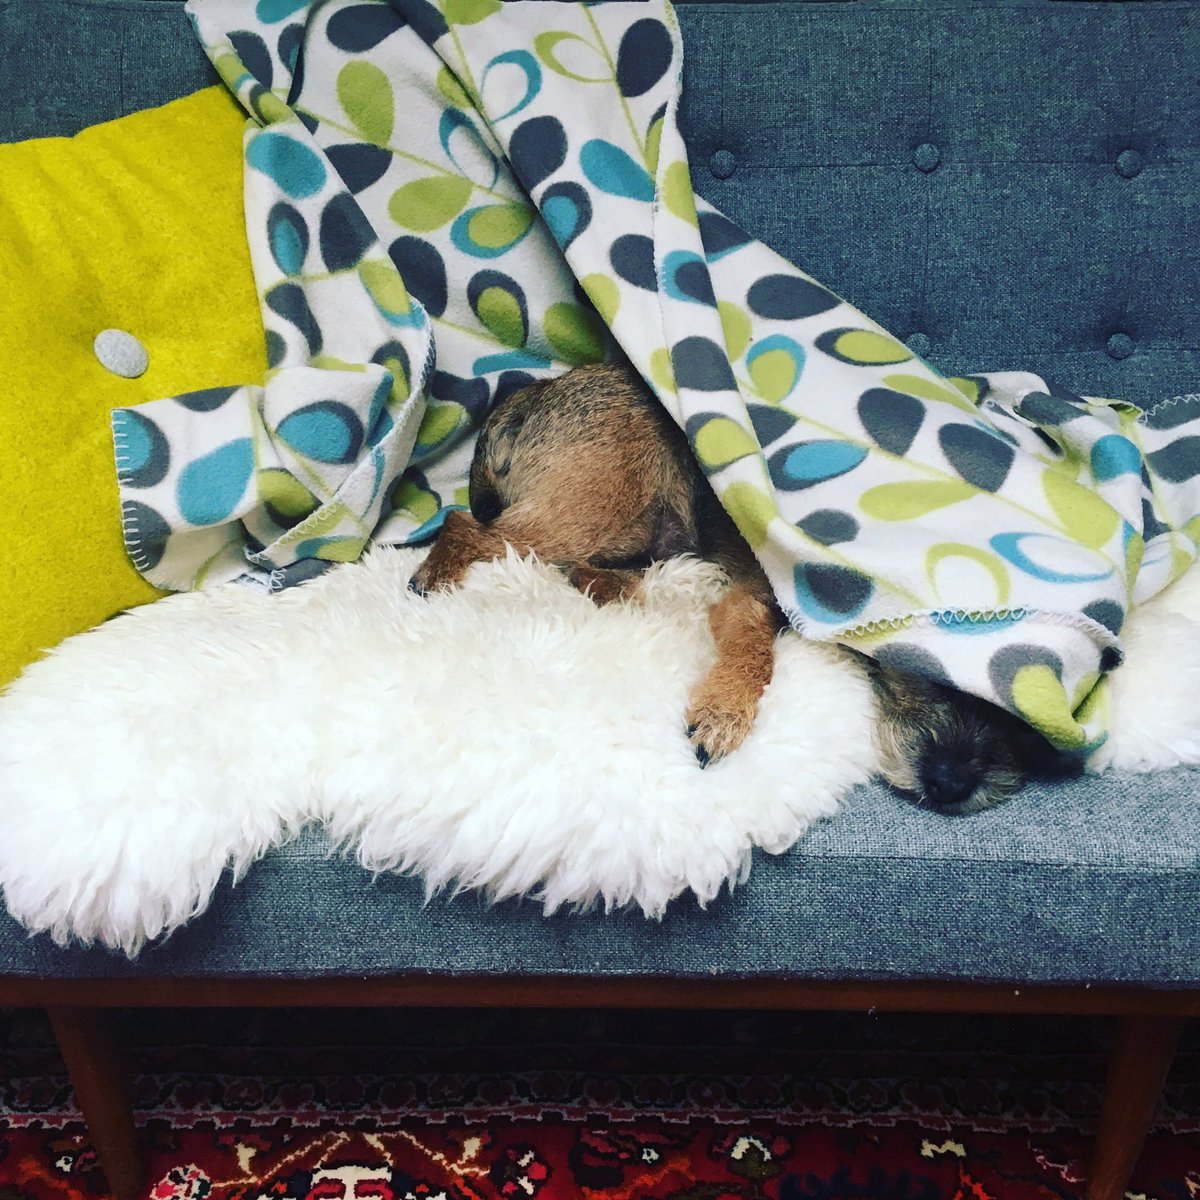 I left him in the hall and headed to my desk - good to see he made himself comfy!!
#borderterrierlove #borderterrier #cosy #comfy #selfemployed #petstowork #workingfromhome